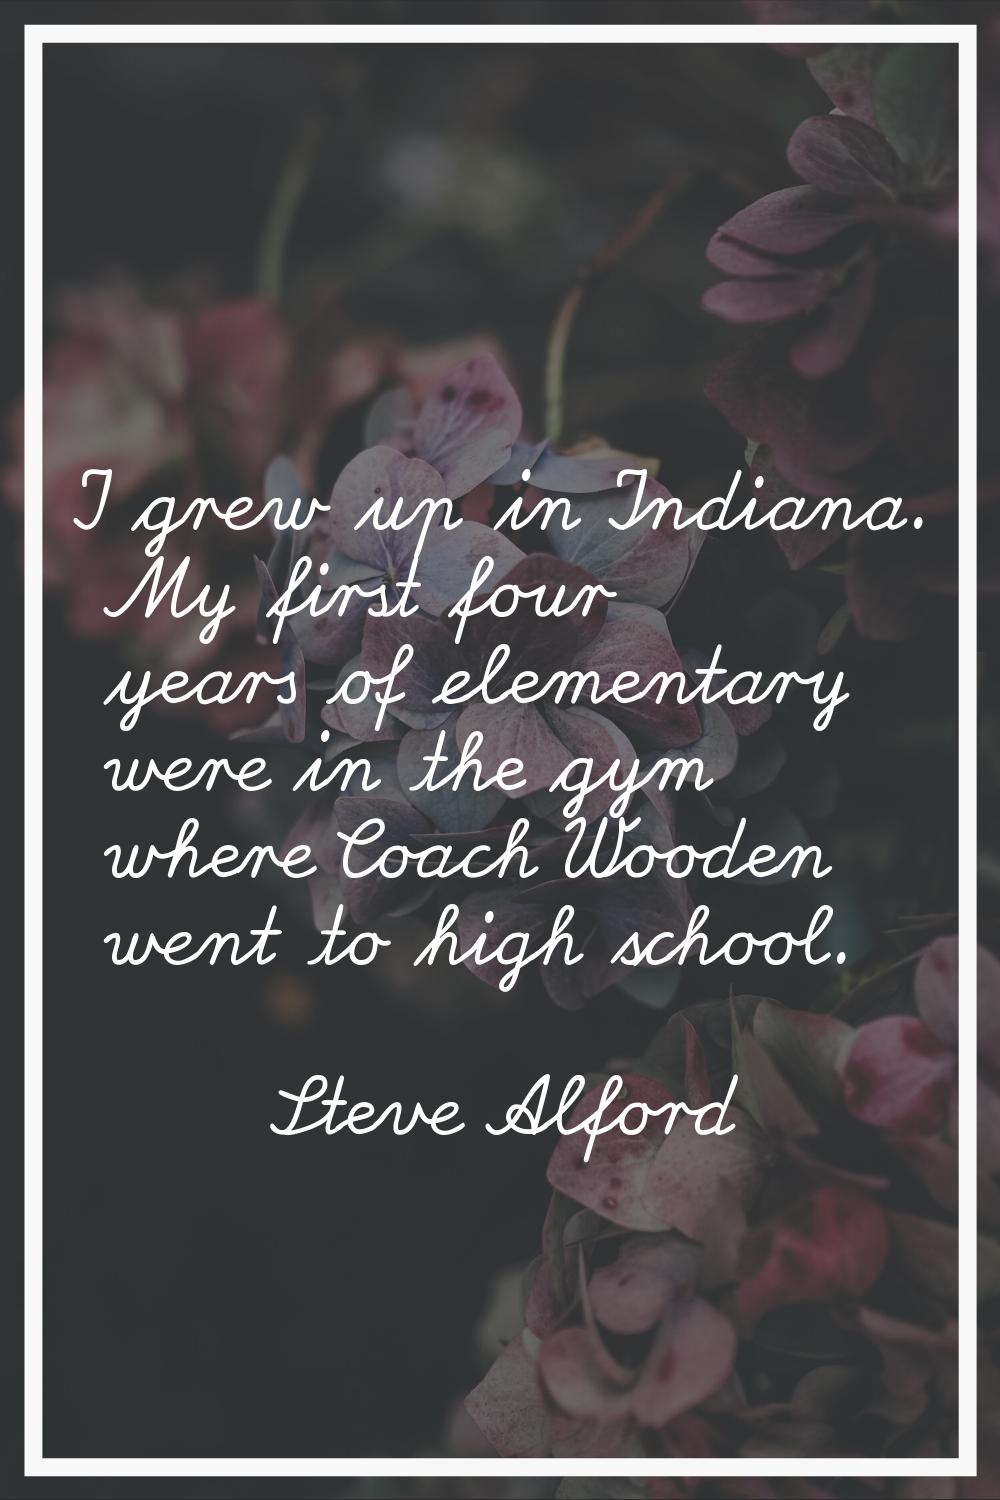 I grew up in Indiana. My first four years of elementary were in the gym where Coach Wooden went to 